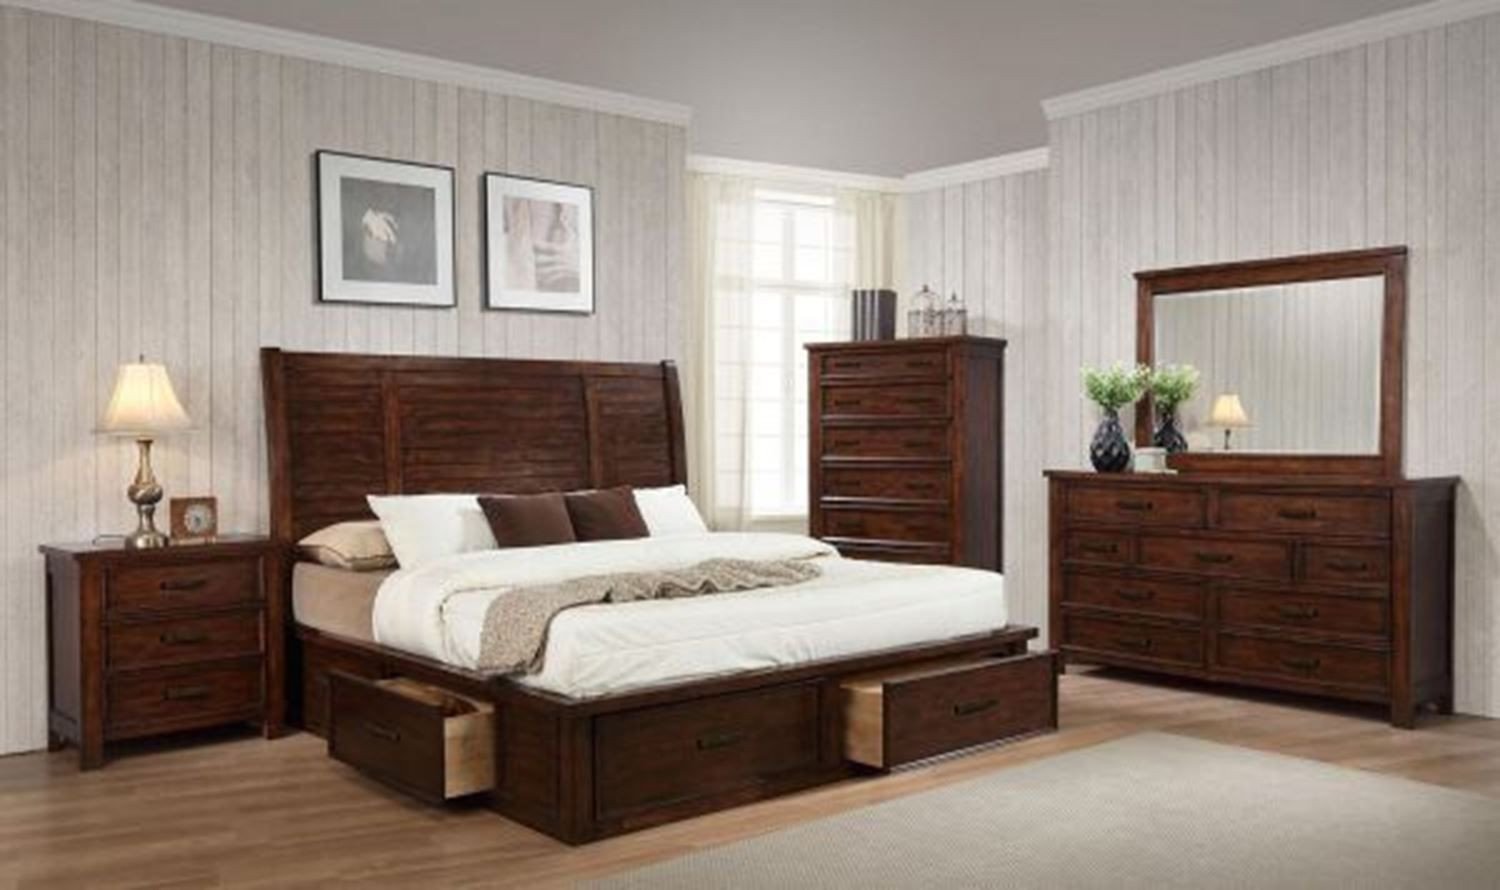 Bedroom Sets San Diego       - Residence 1xb Plan, Del Sur The Estates, San Diego, CA ... / Bedroom sets and headboards available in queen, king and california king size bed frames.